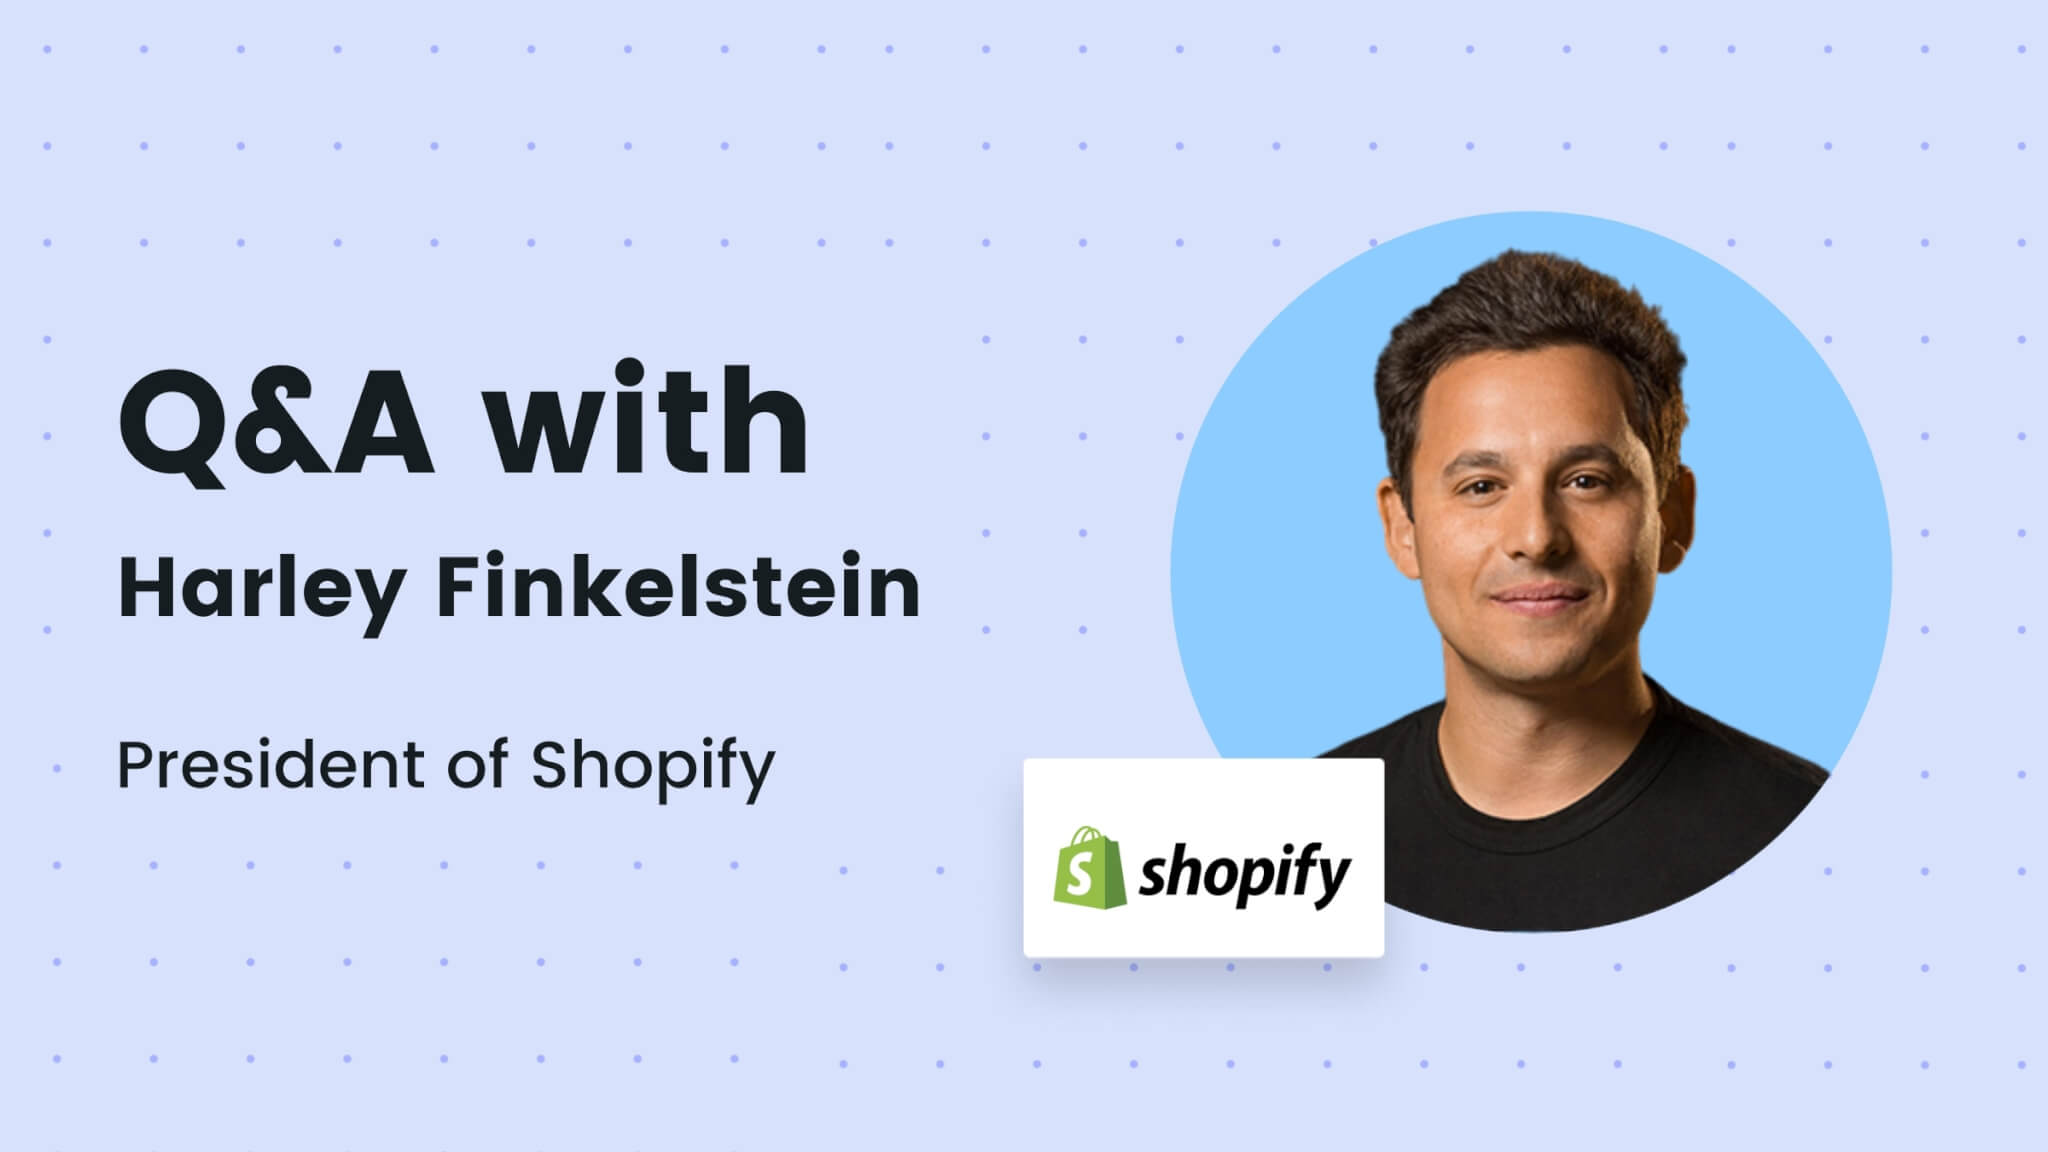 Harley Finkelstein: From Class President to the President of Shopify